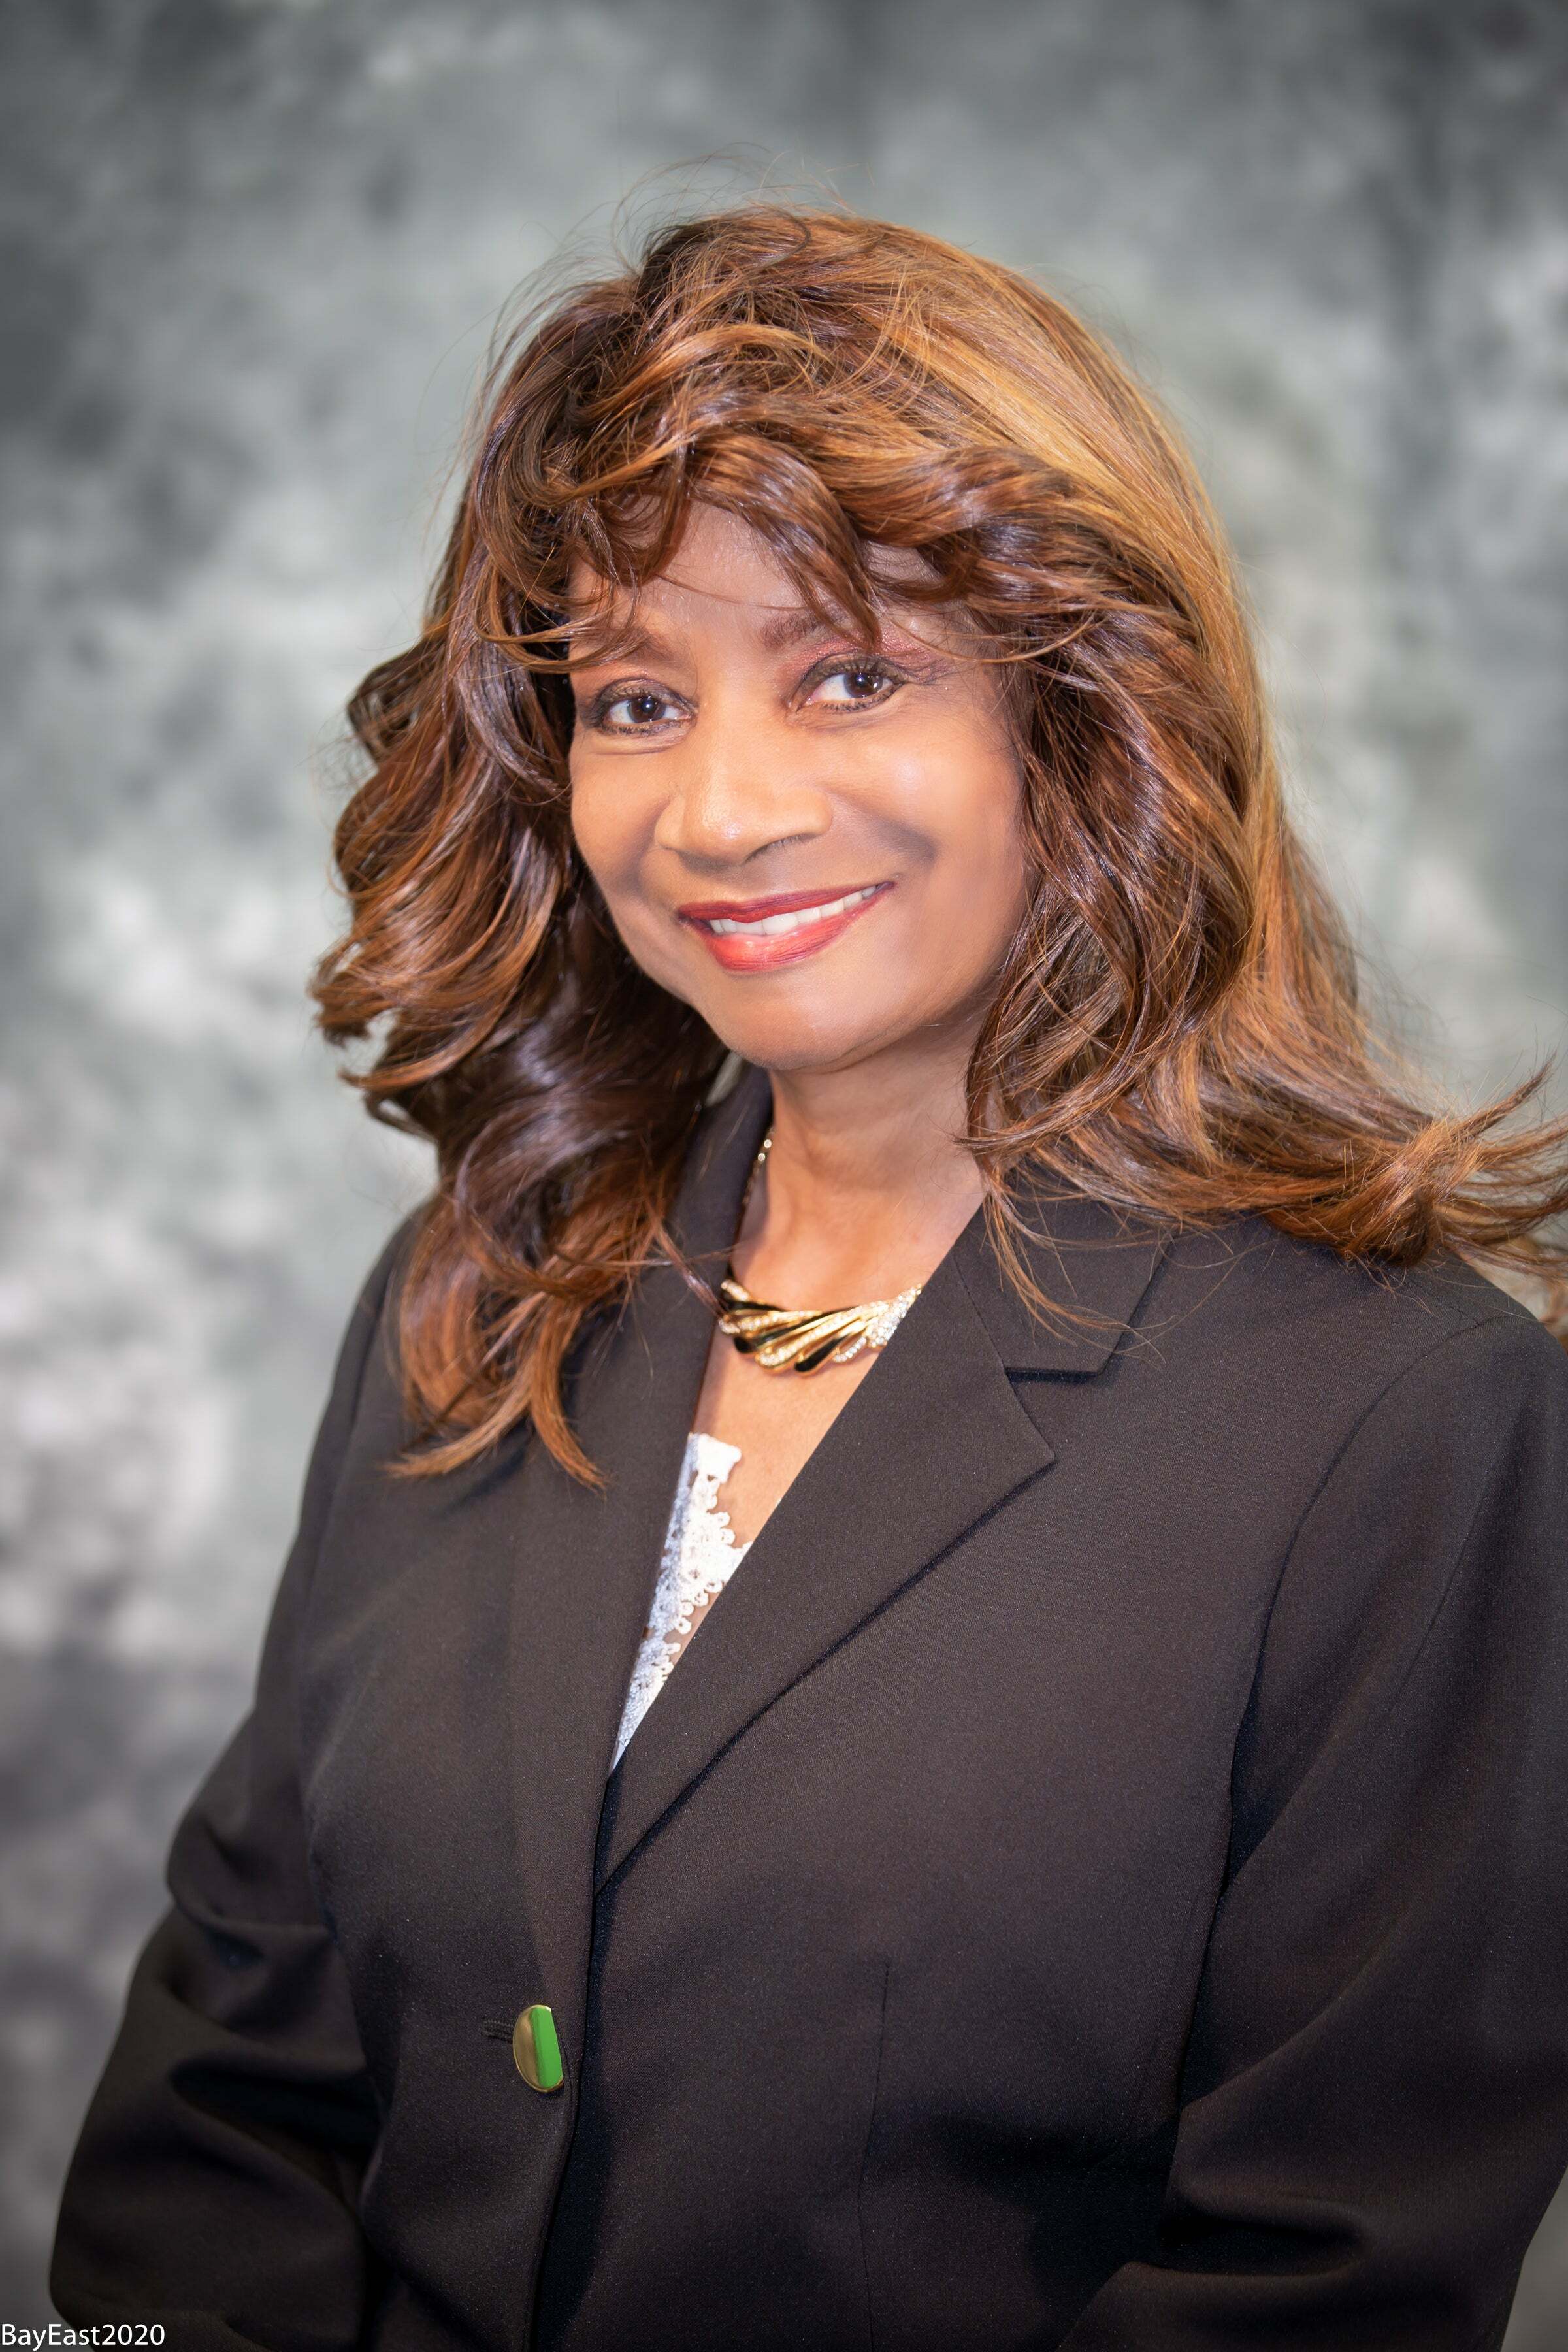 Audrey James, Real Estate Salesperson in Oakland, Reliance Partners